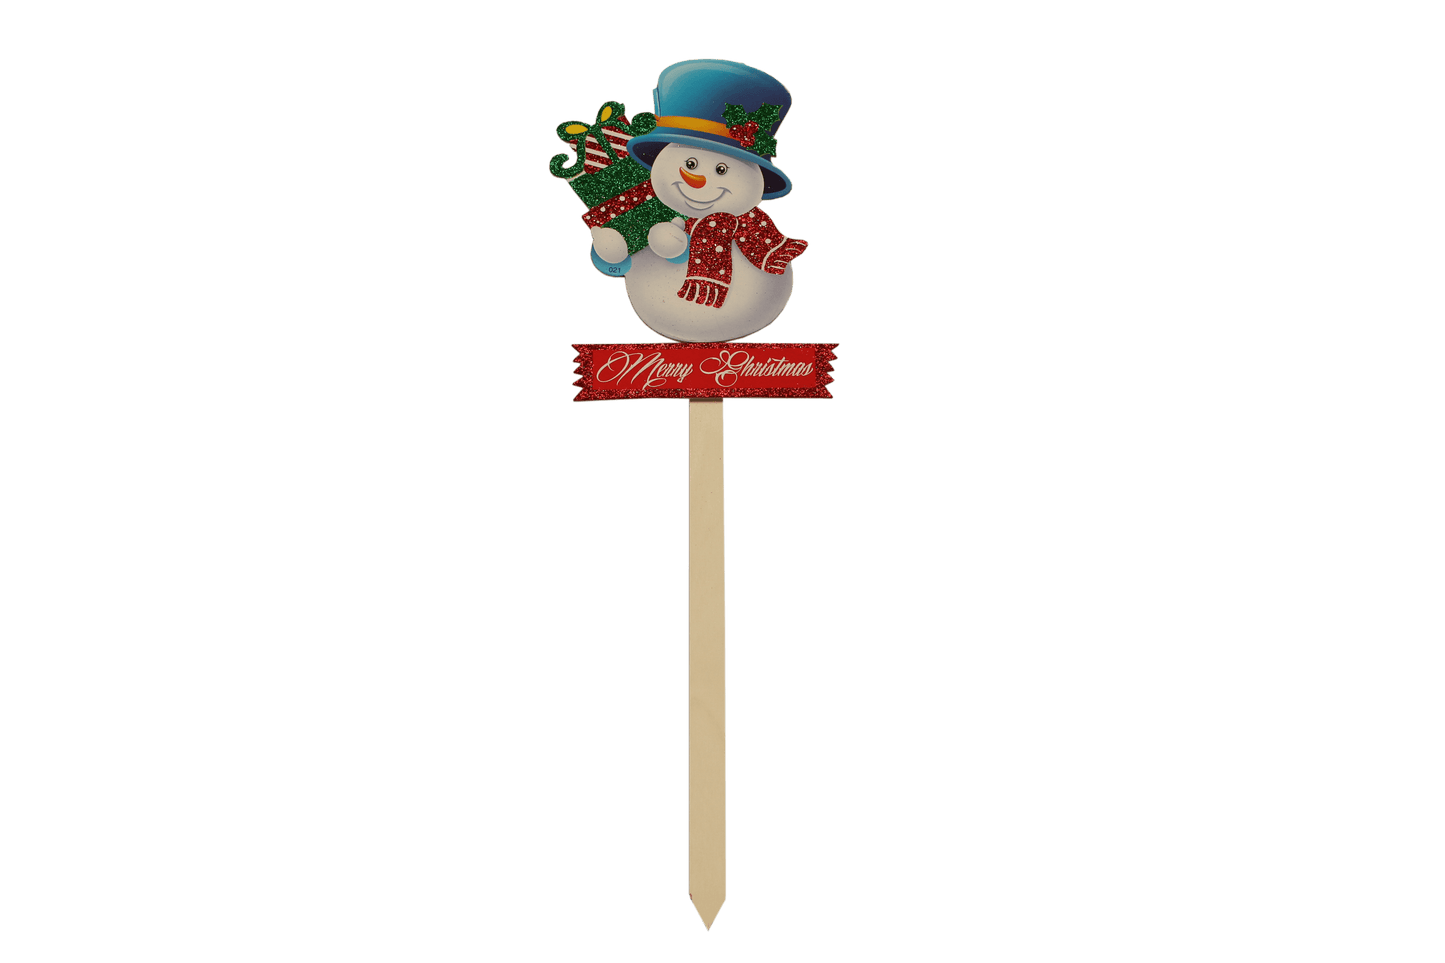 Christmas Snowman with Presents "Merry Christmas" Pick